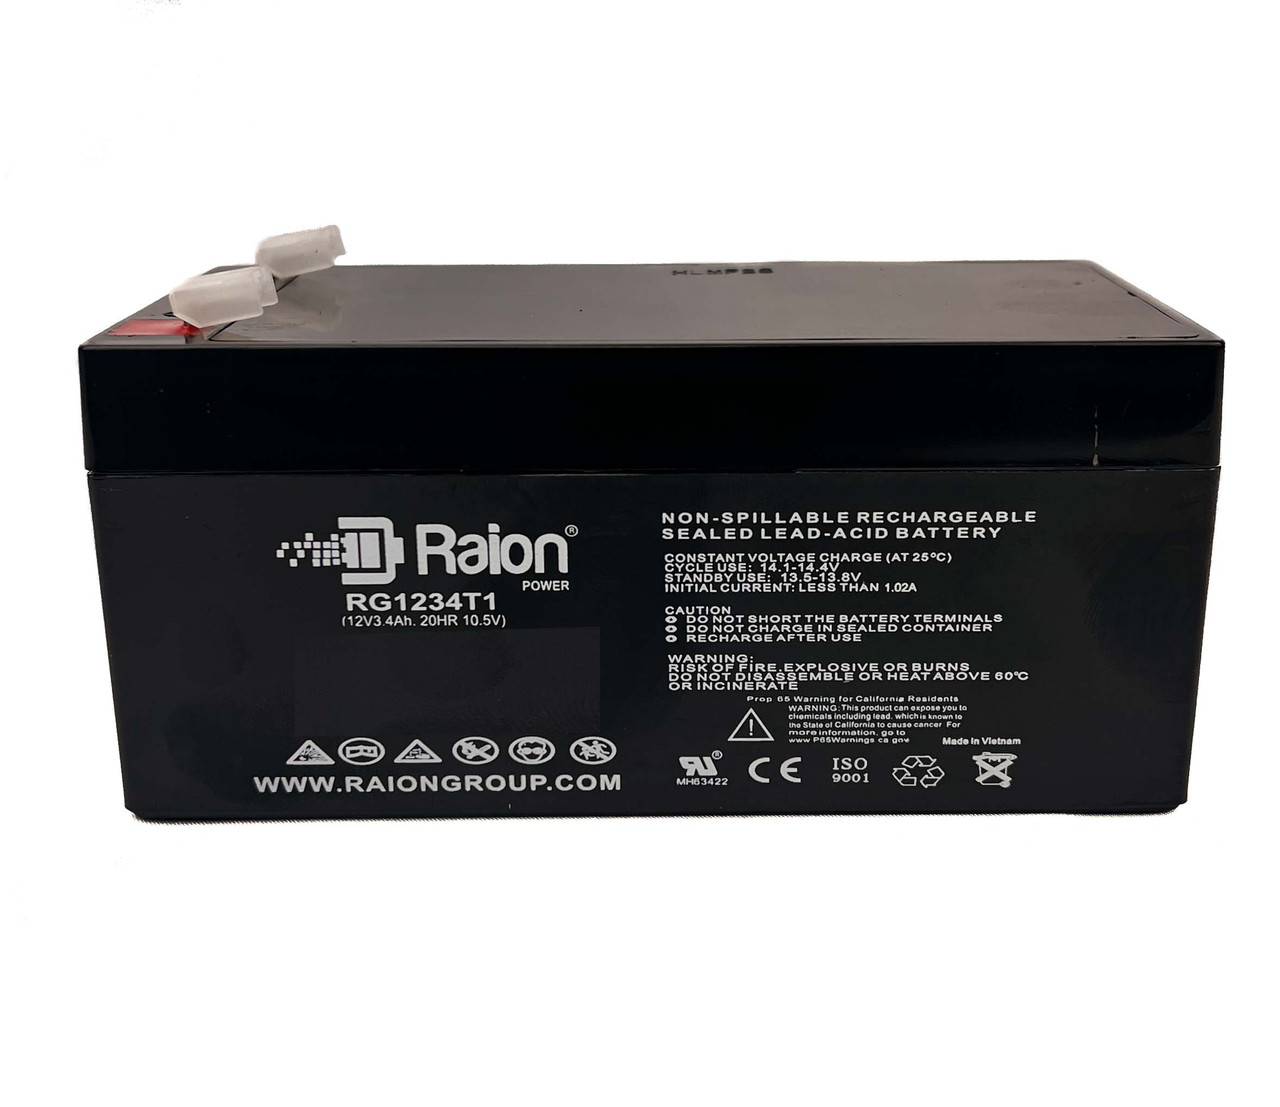 Raion Power RG1234T1 Rechargeable Compatible Replacement Battery for Duracell DURA12-3.3F